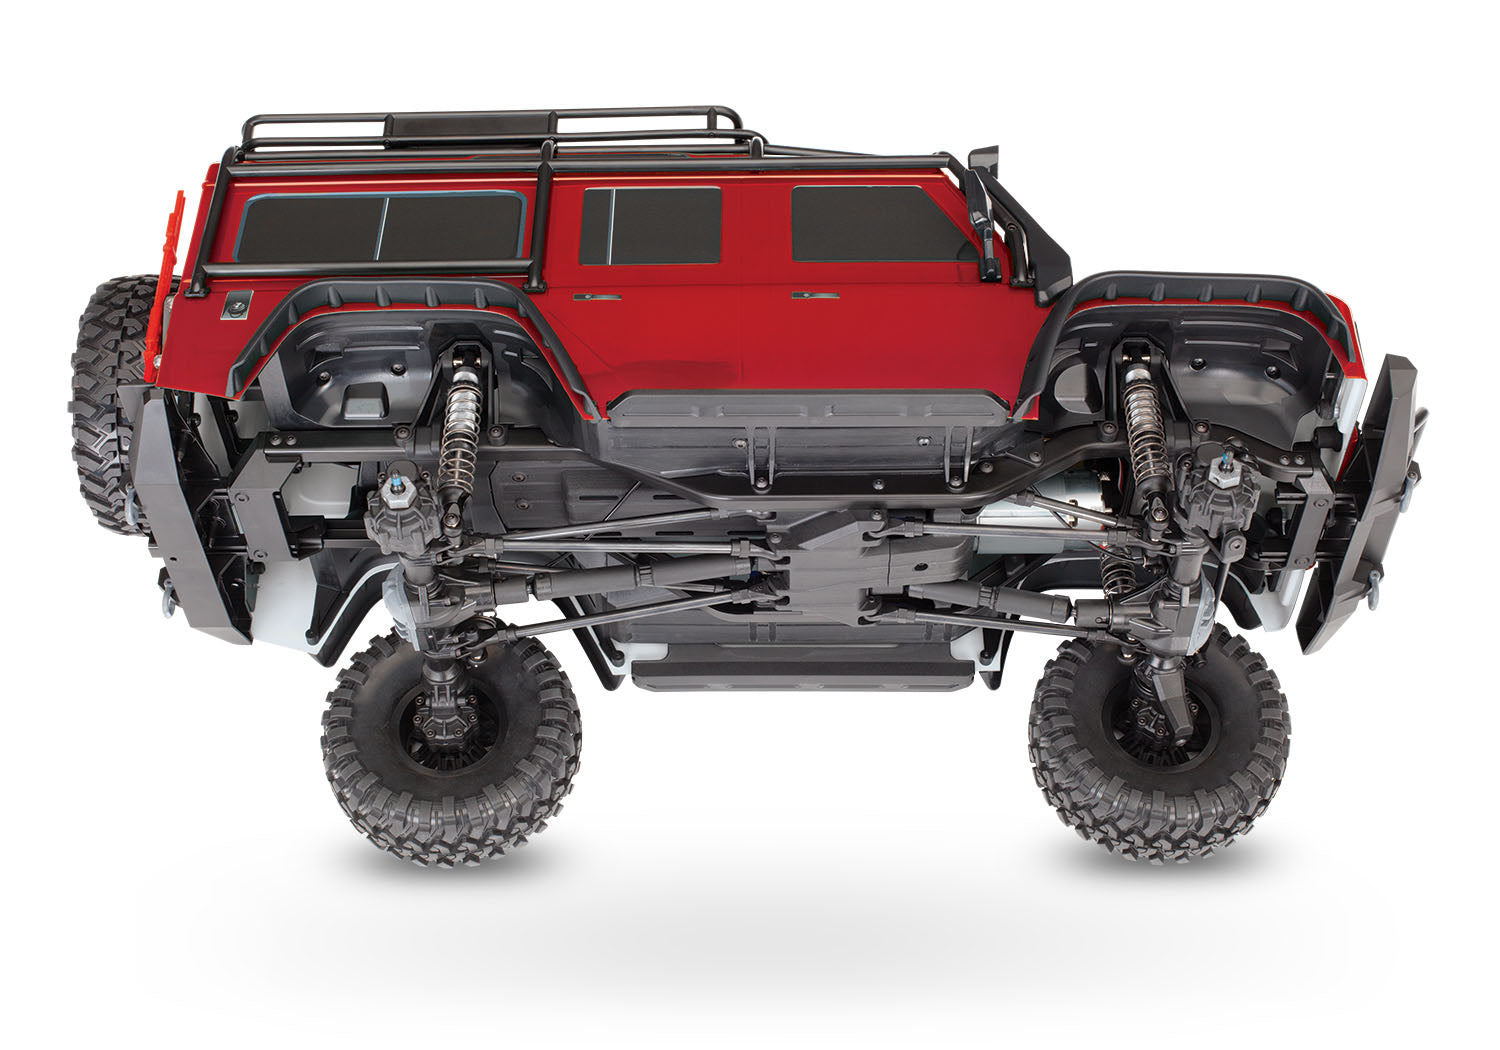 Traxxas 1/10 4WD Crawler RTR TRX-4 Land Rover Defender - Red TRA82056-4RED